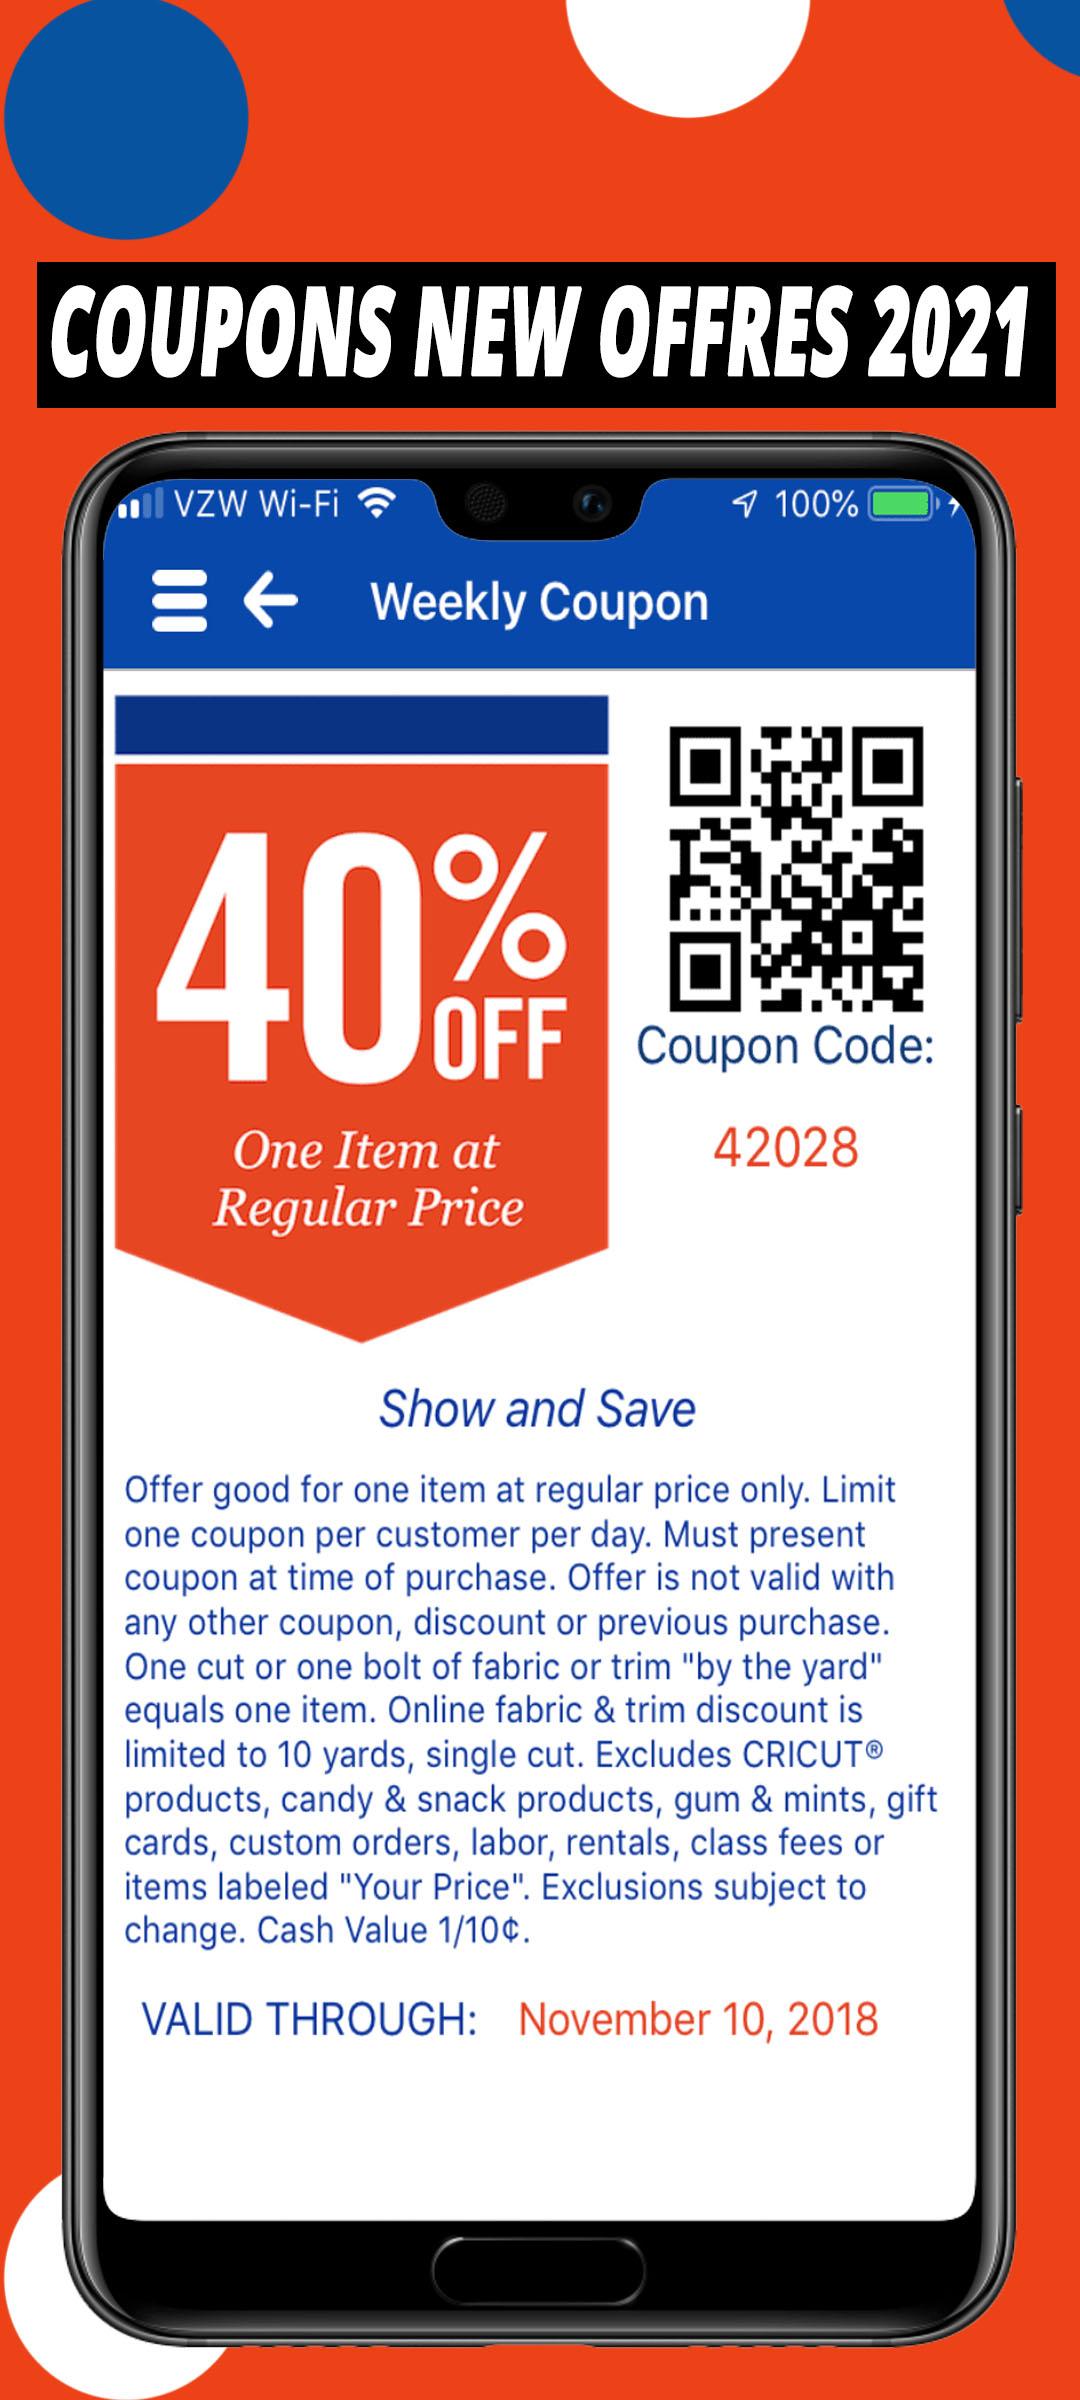 QR-Coupon-code-hobby-lobby-iphone-scan-coupons